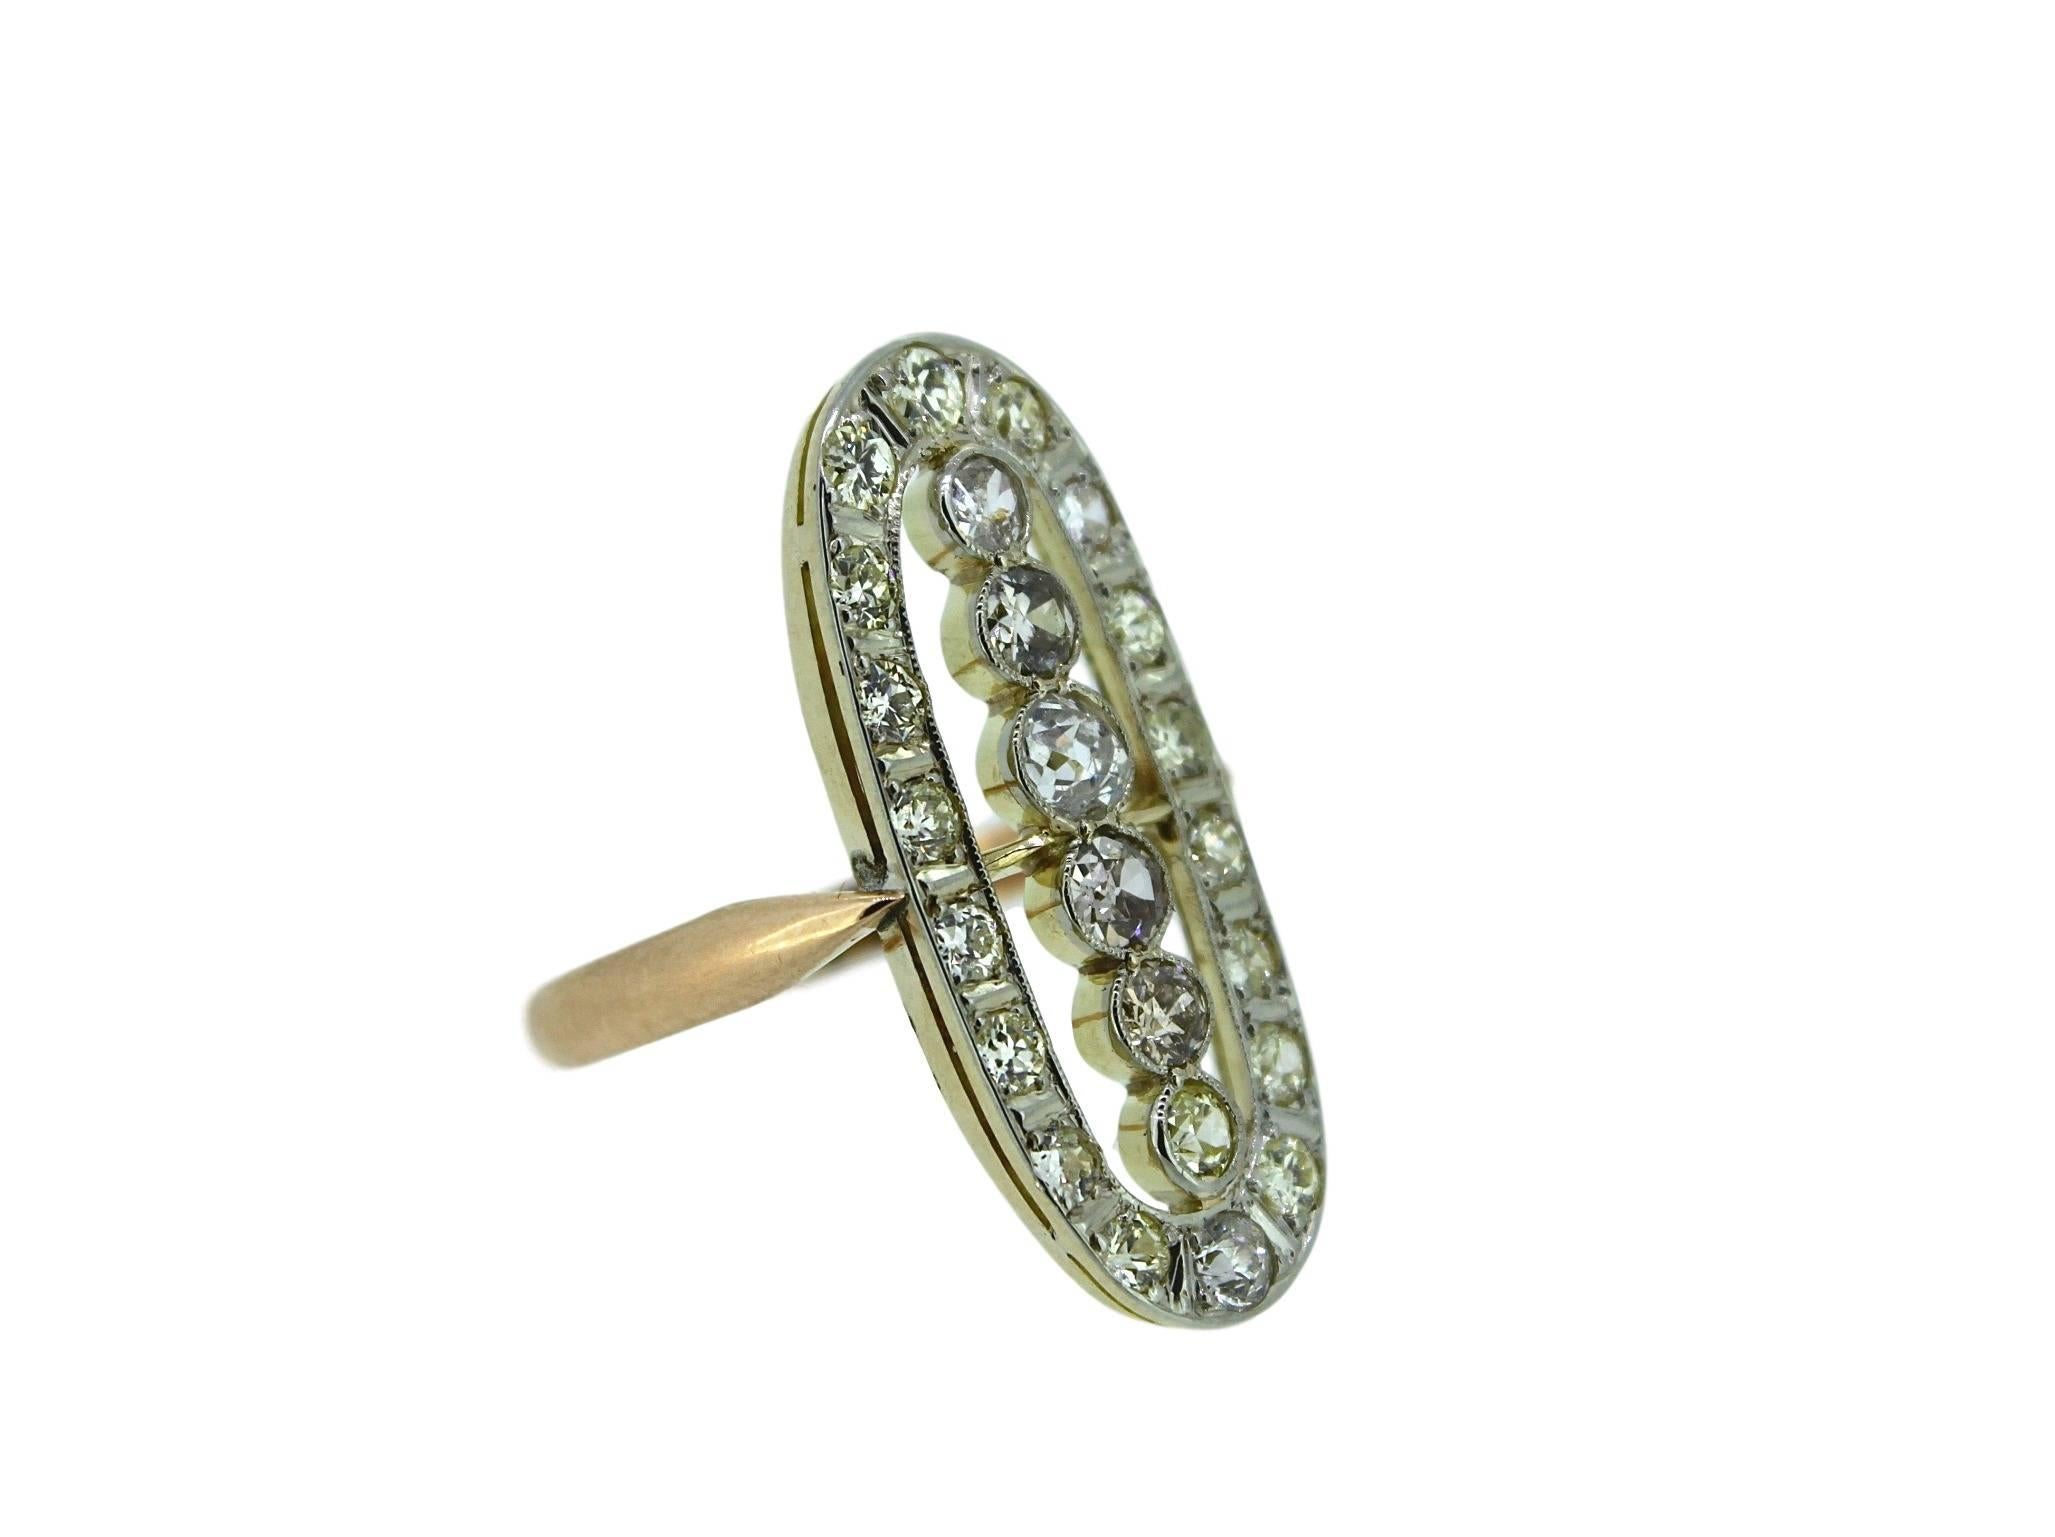 1910s 1920s Old European Cut Diamonds Gold Ring In Excellent Condition For Sale In Amsterdam, NL